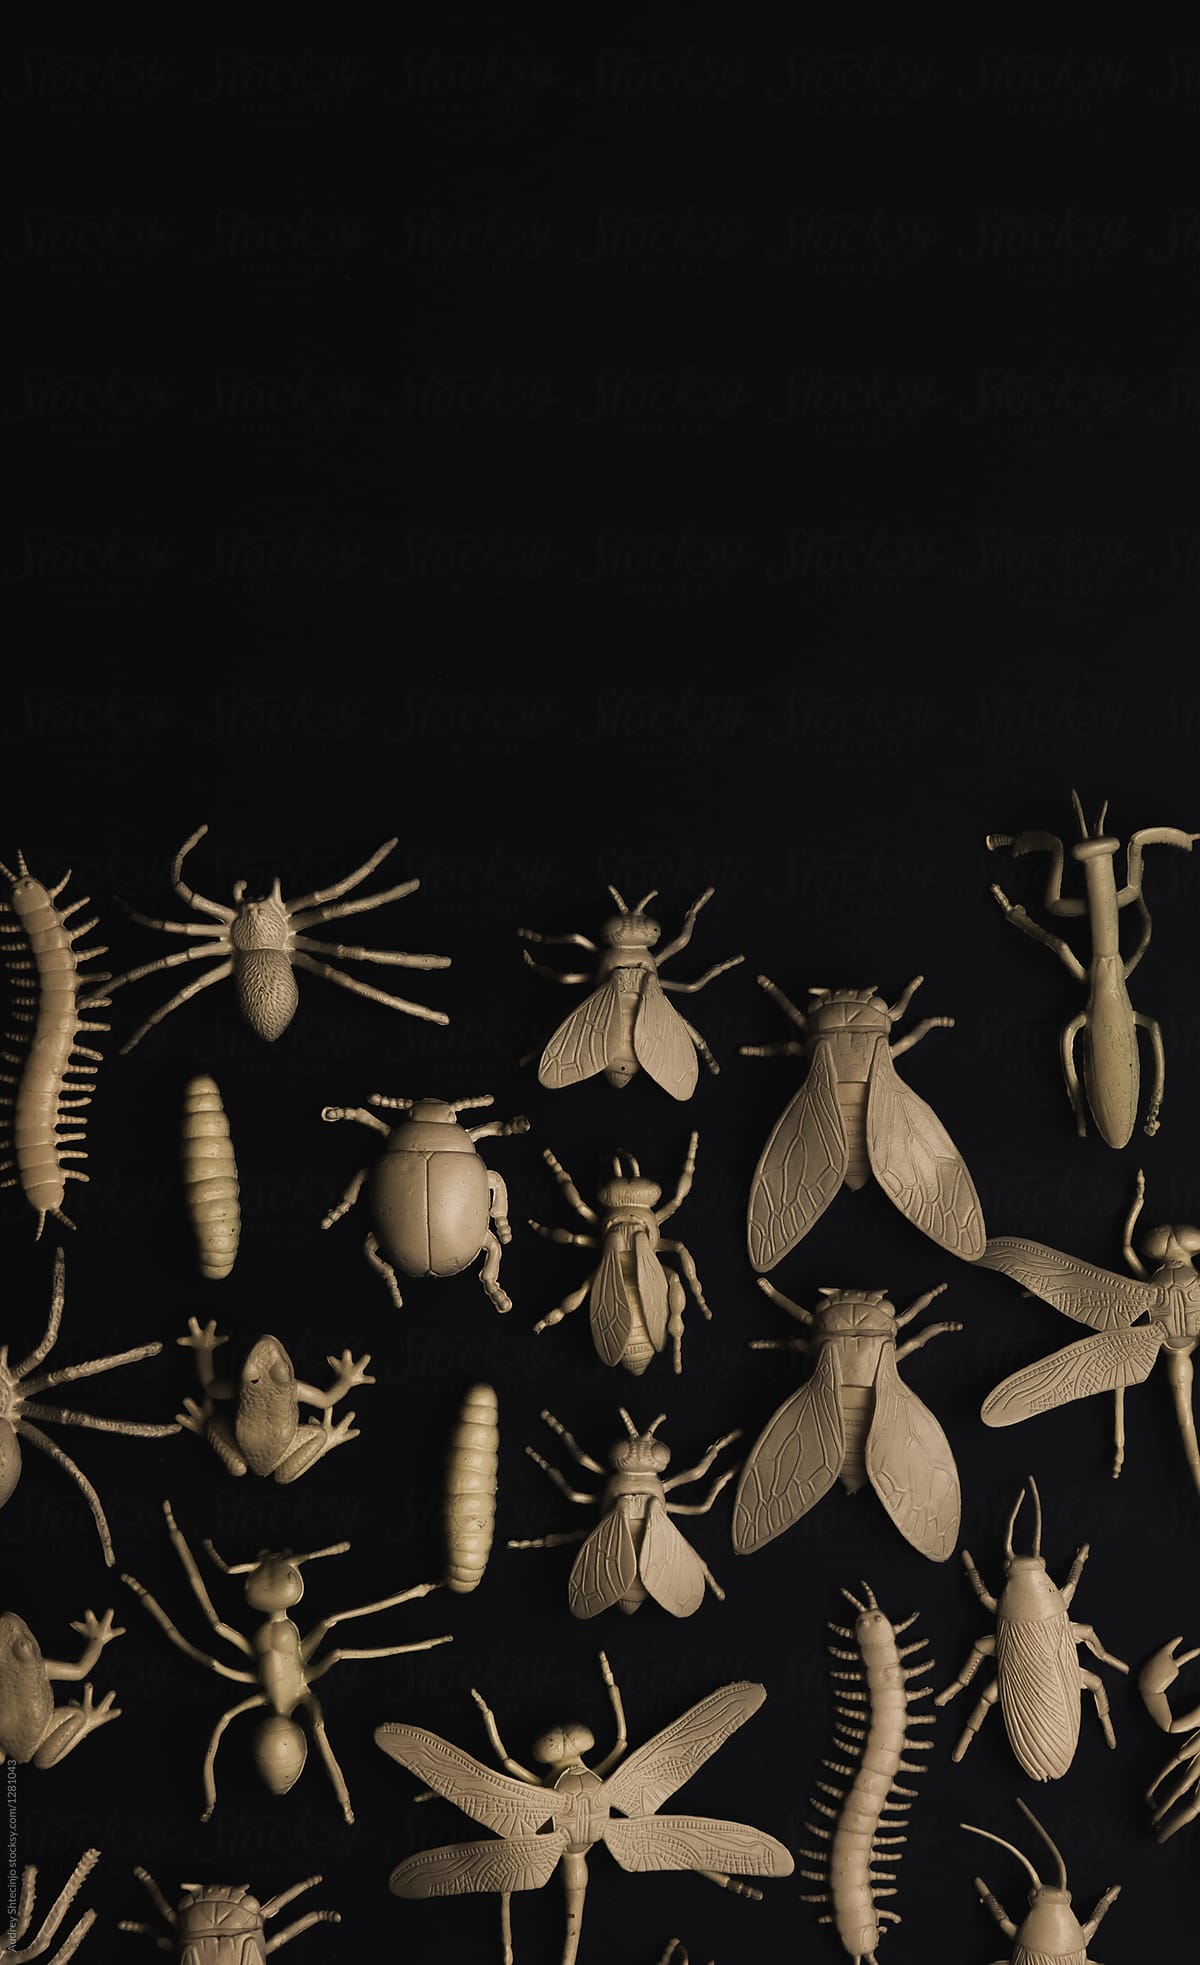 Insectorium/collection of bugs/insects.